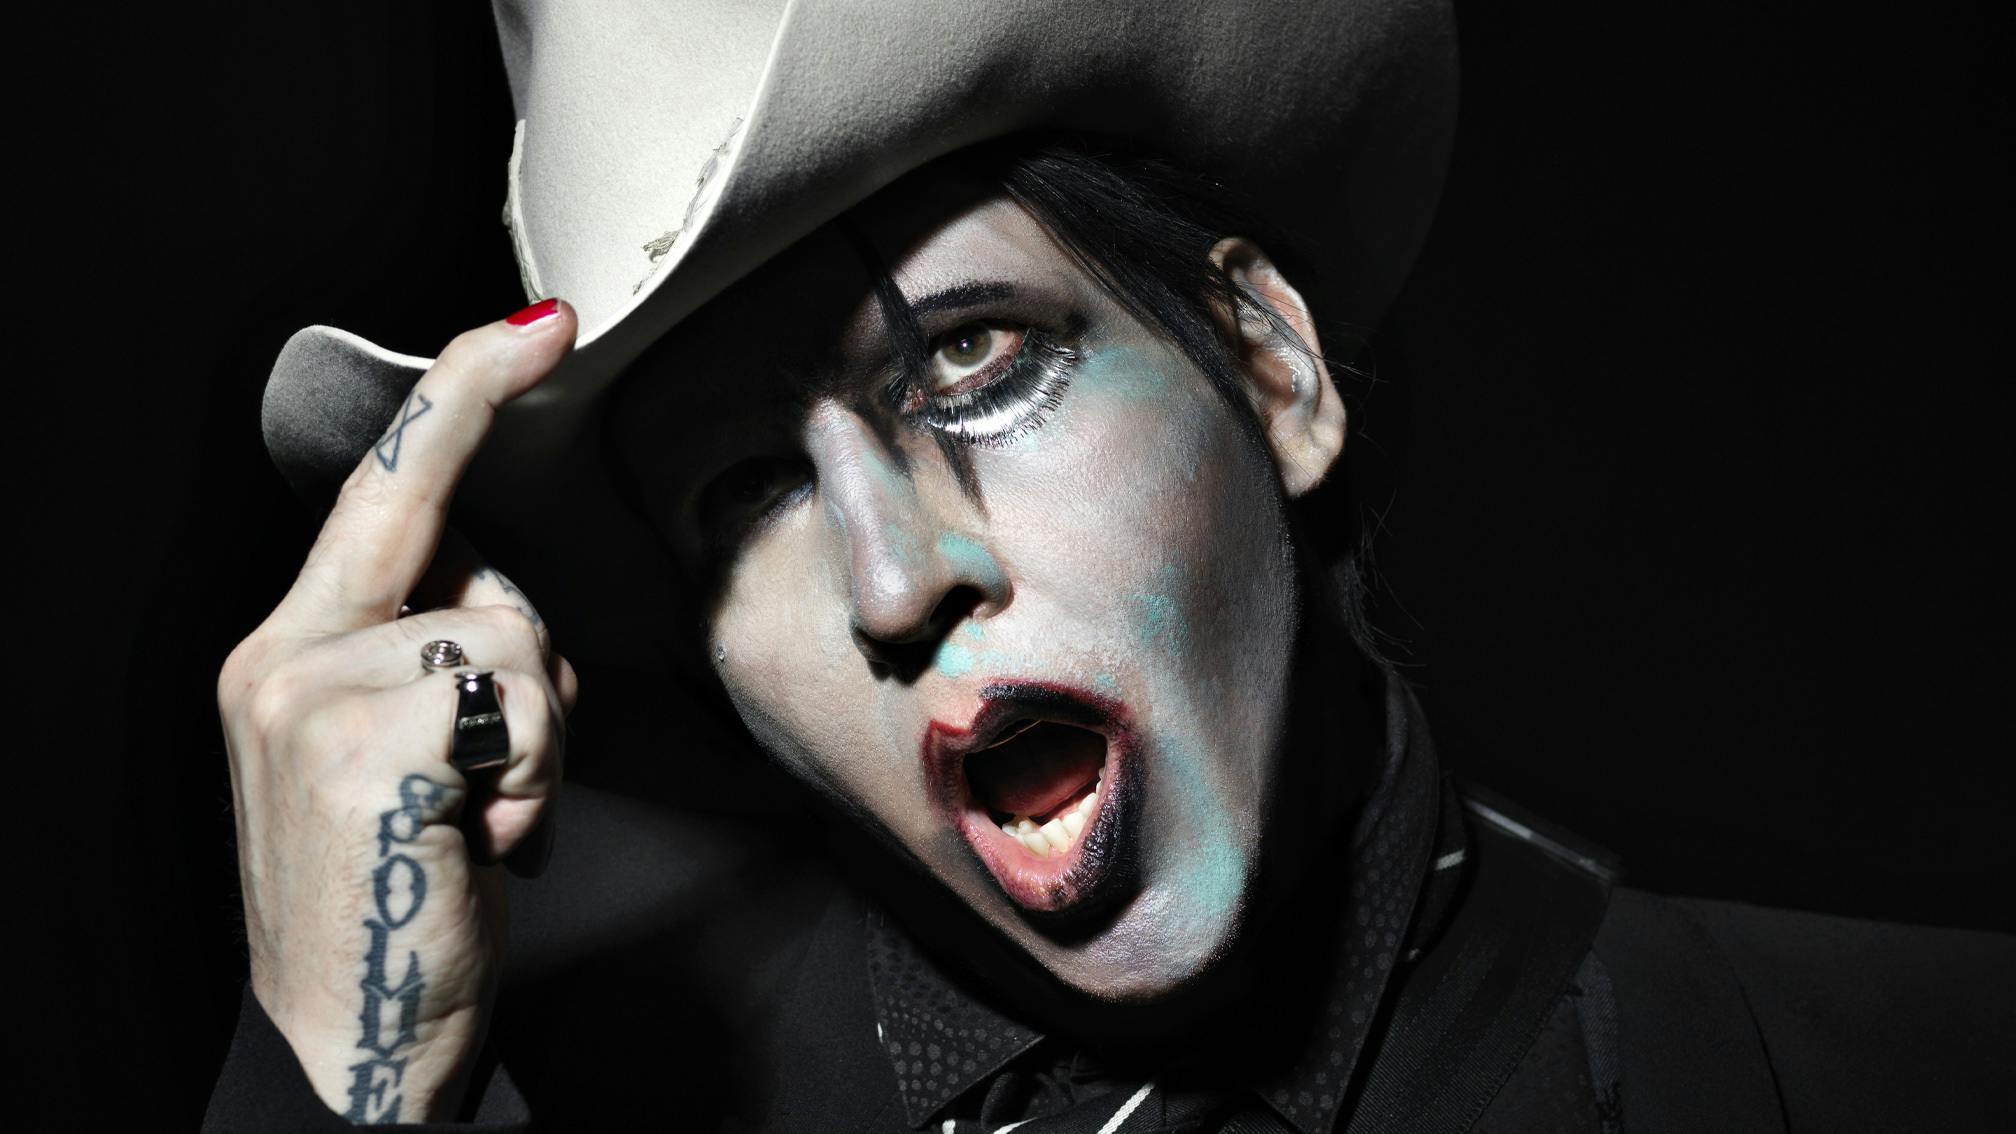 Marilyn Manson dropped by record label following allegations of abuse